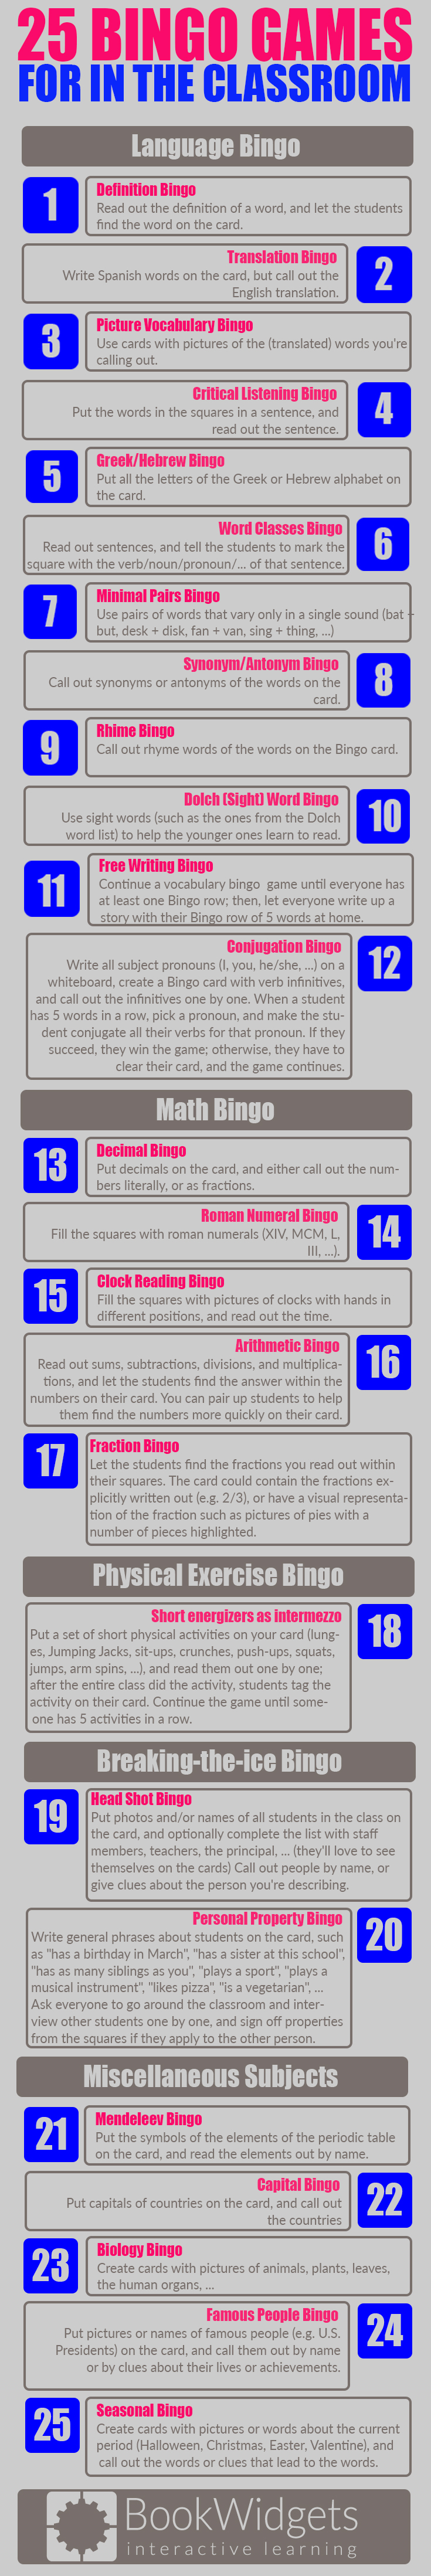 25 bingo games for in the classroom